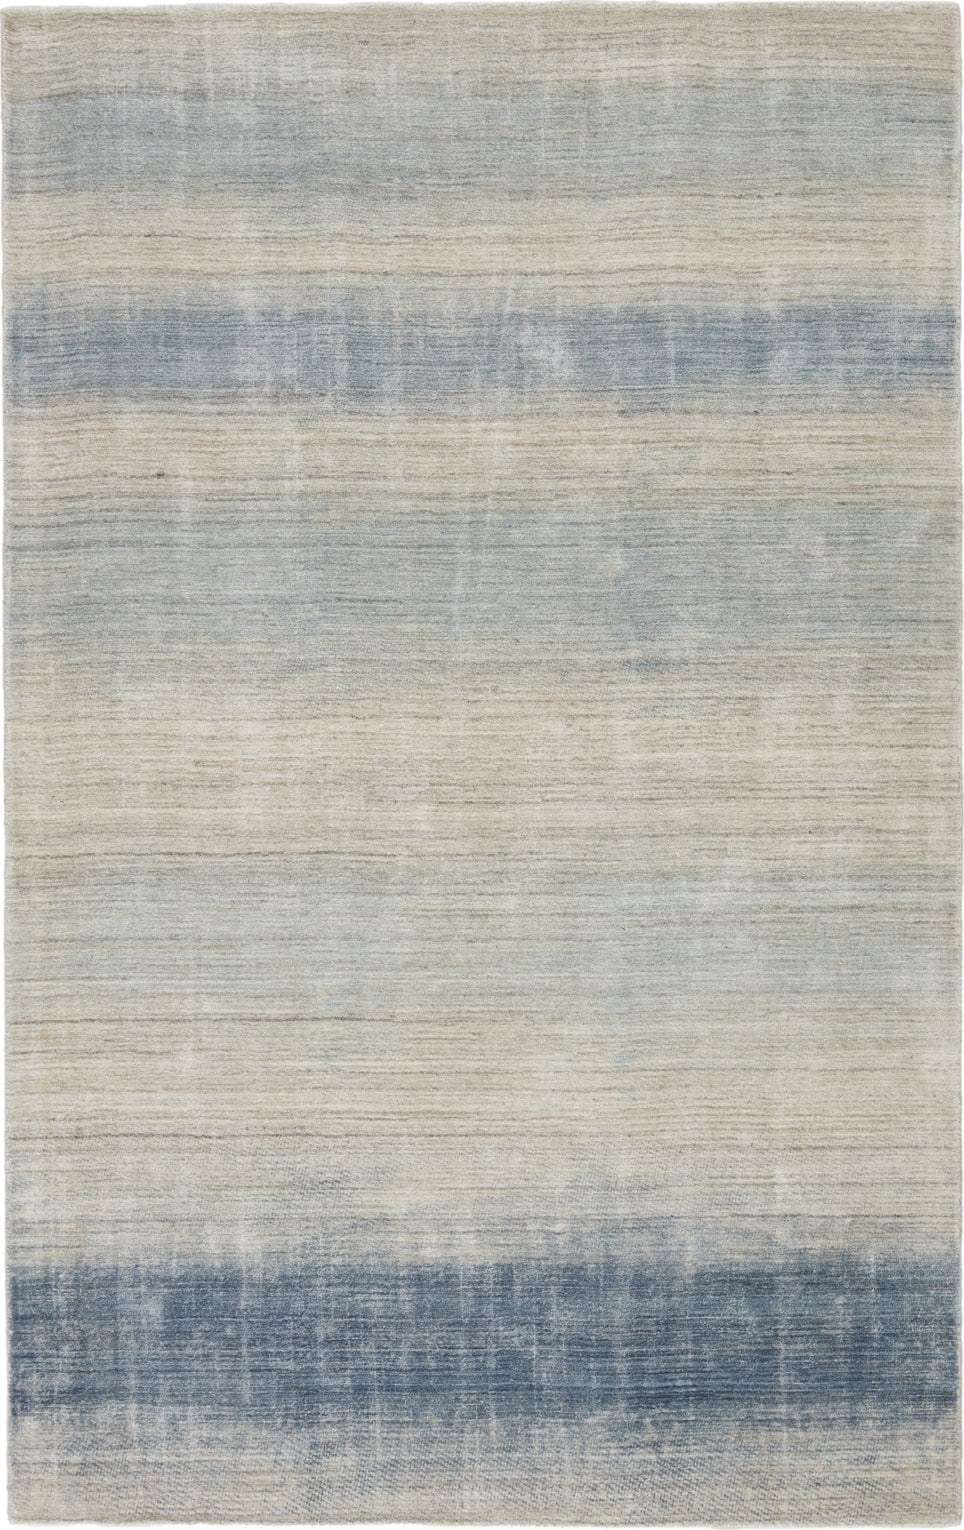 Jaipur Living Newport by Barclay Butera Bayshores NBB04 Blue/Beige Area Rug - Top Down